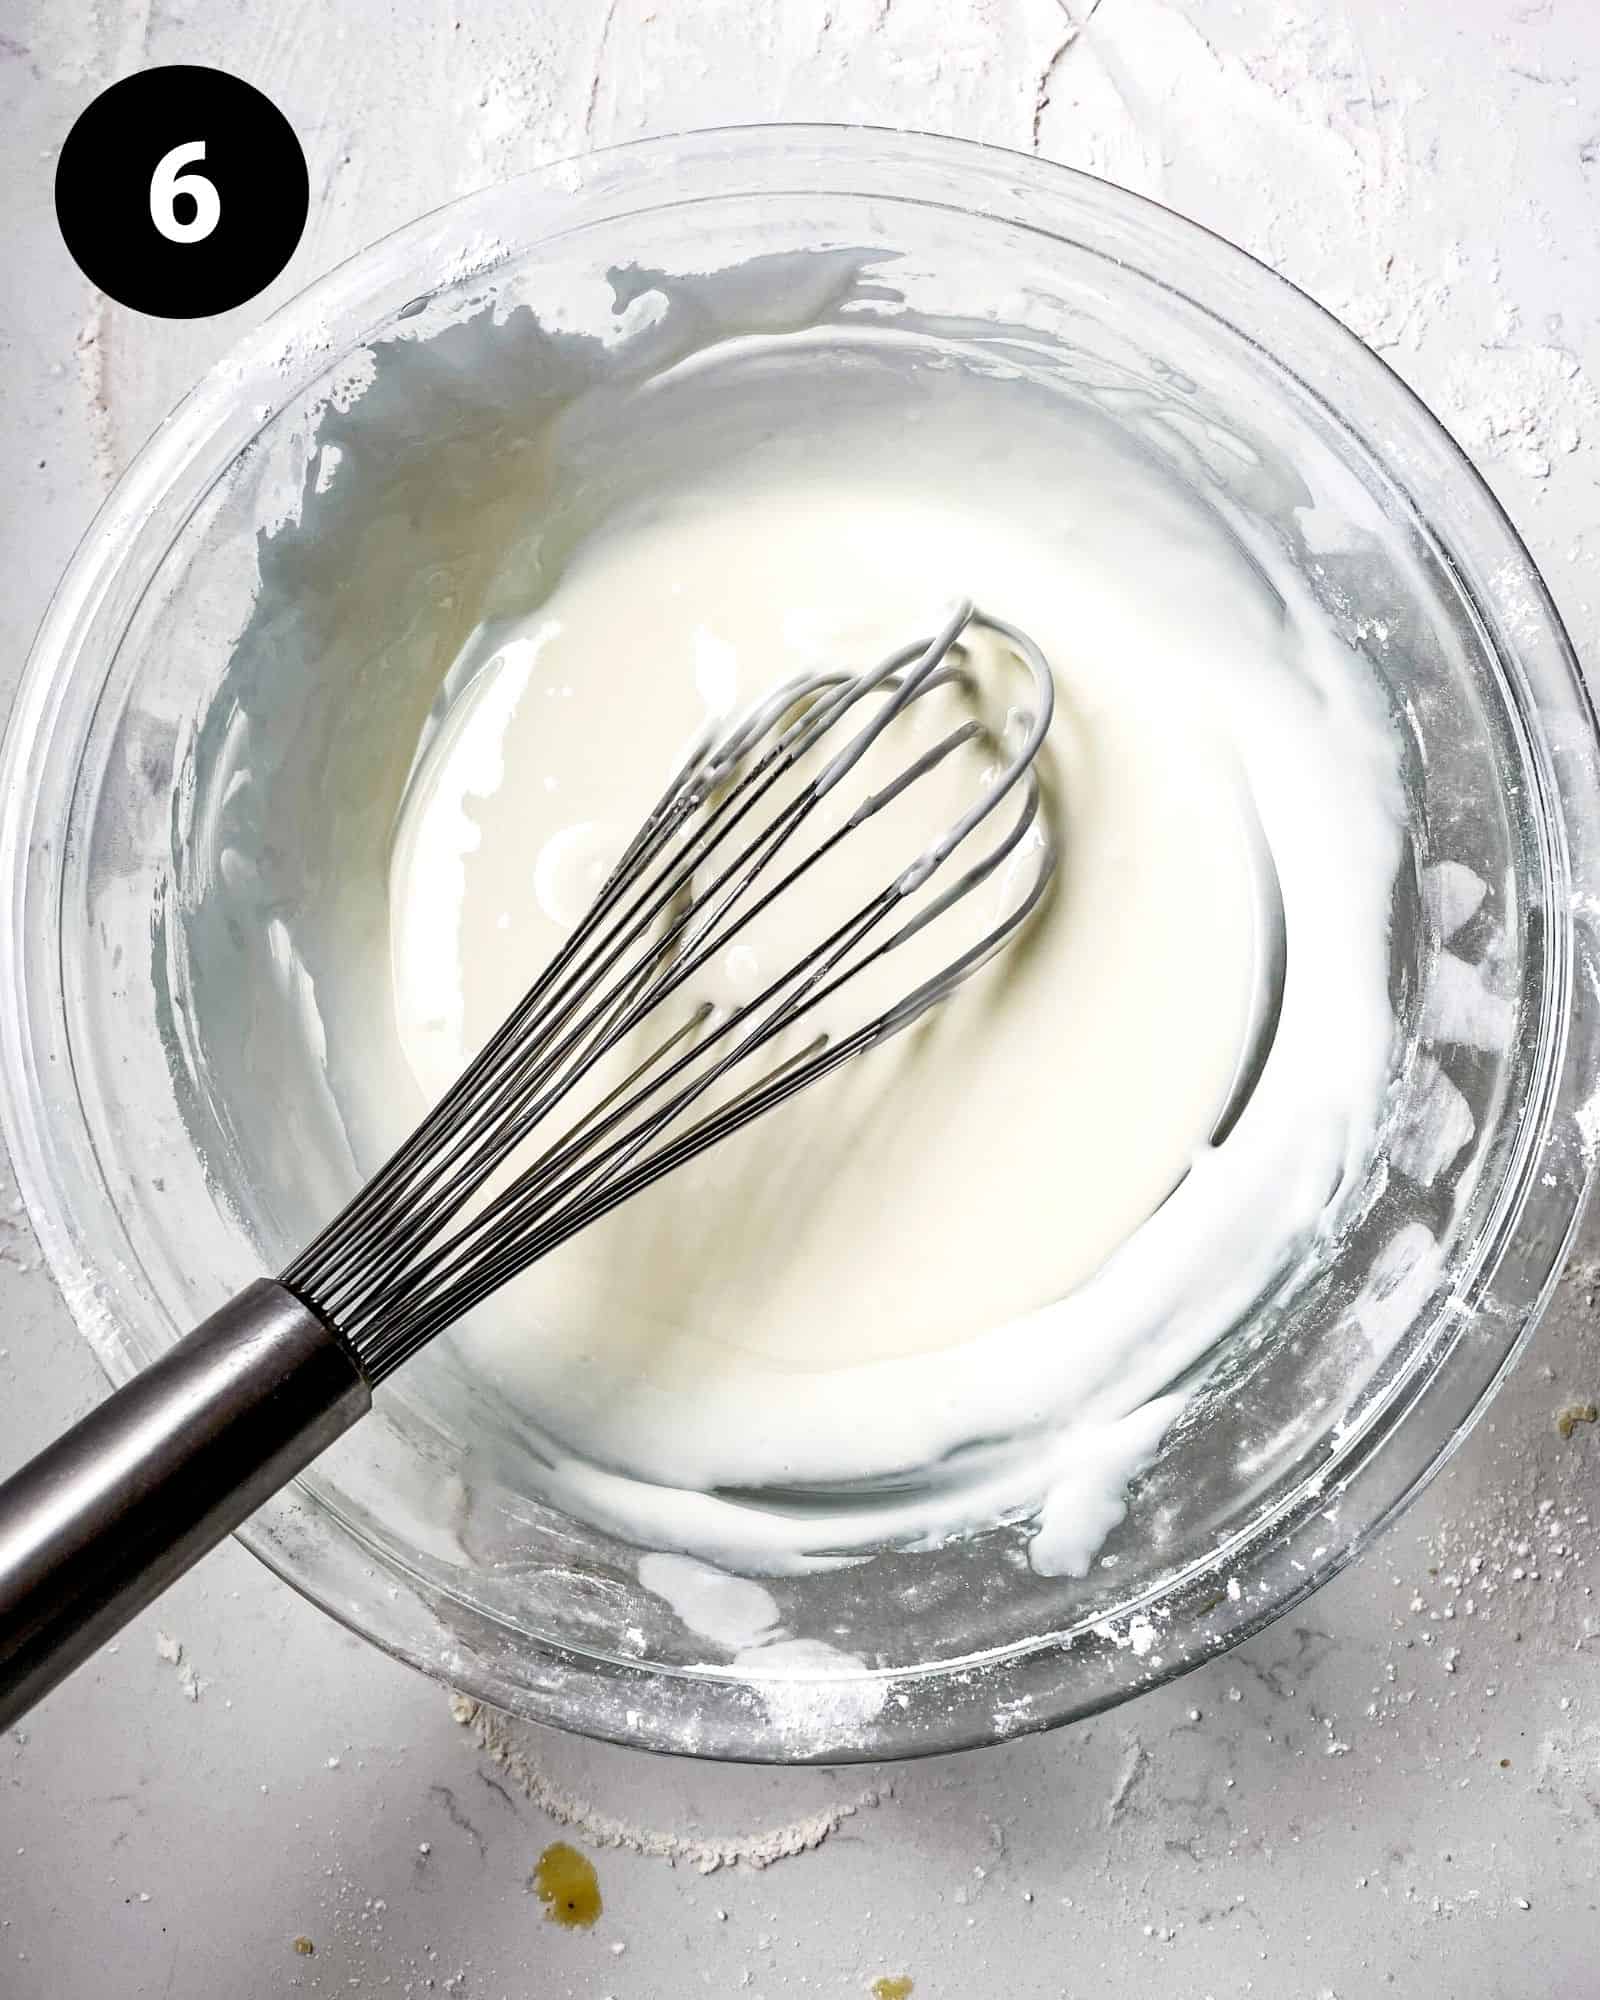 royal icing whisked together in a mixing bowl.